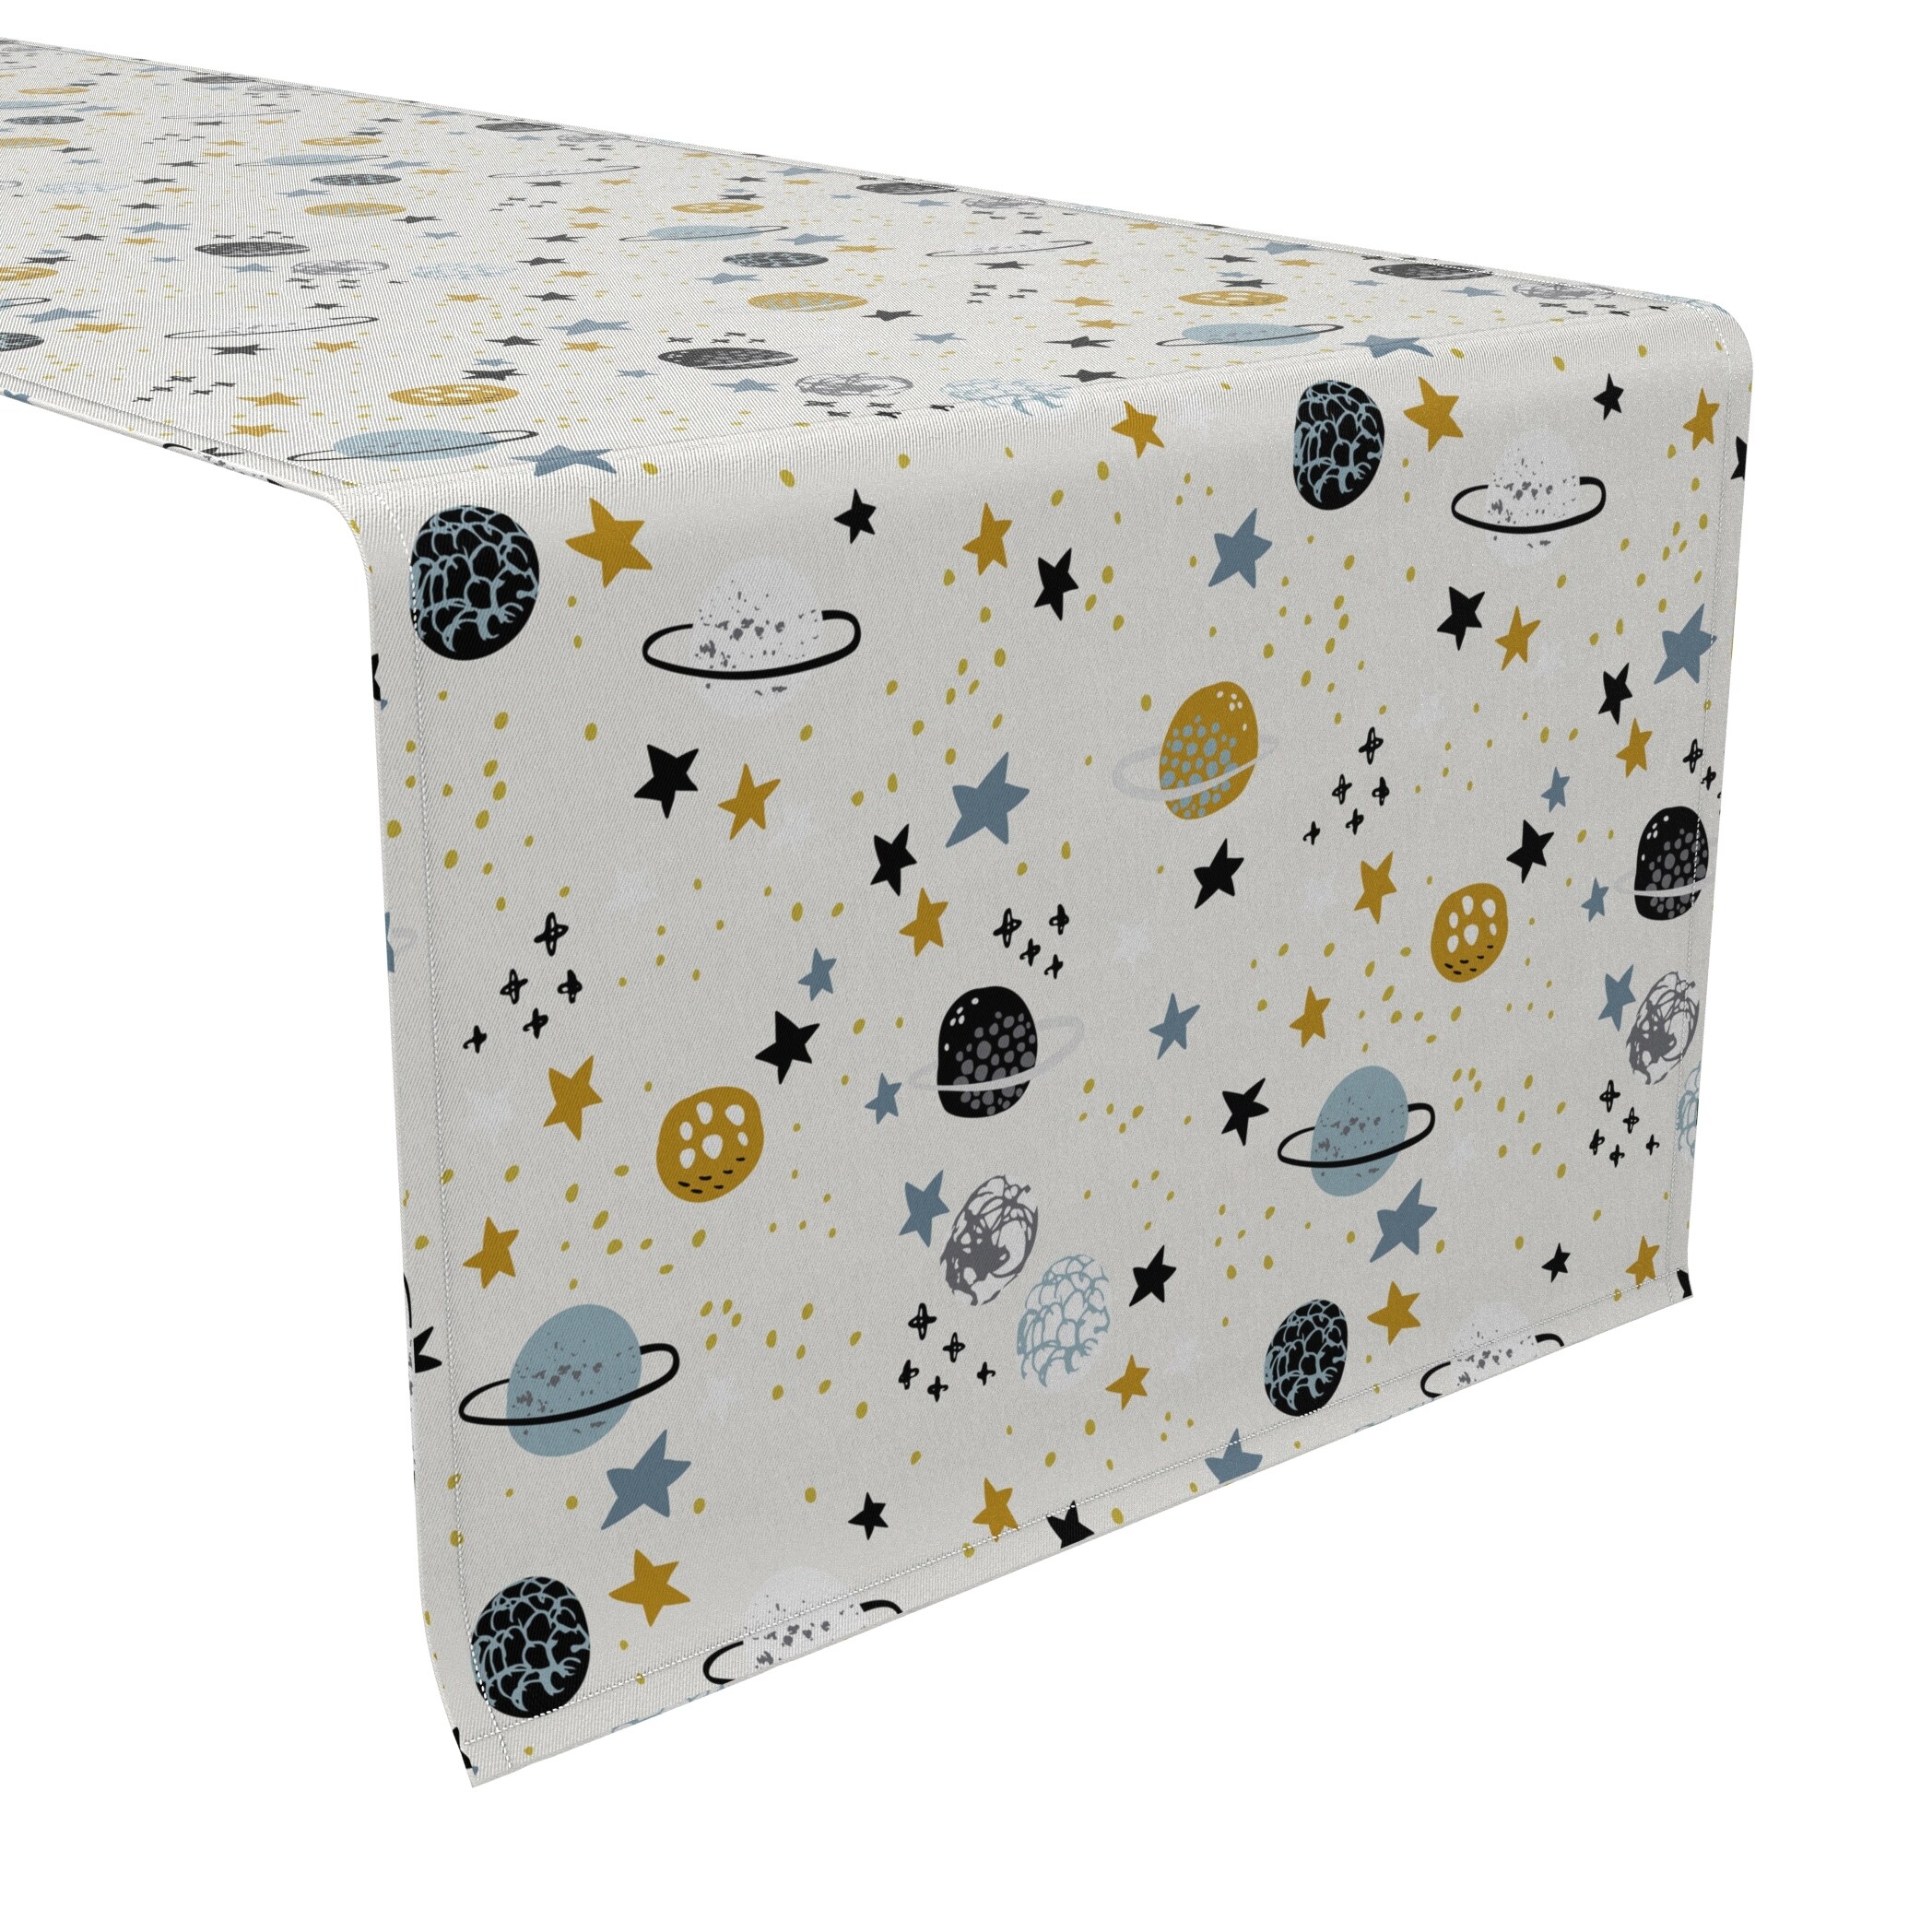 Fabric Textile Products, Inc. Table Runner, 100% Cotton, 16x108", Cartoon Galaxy